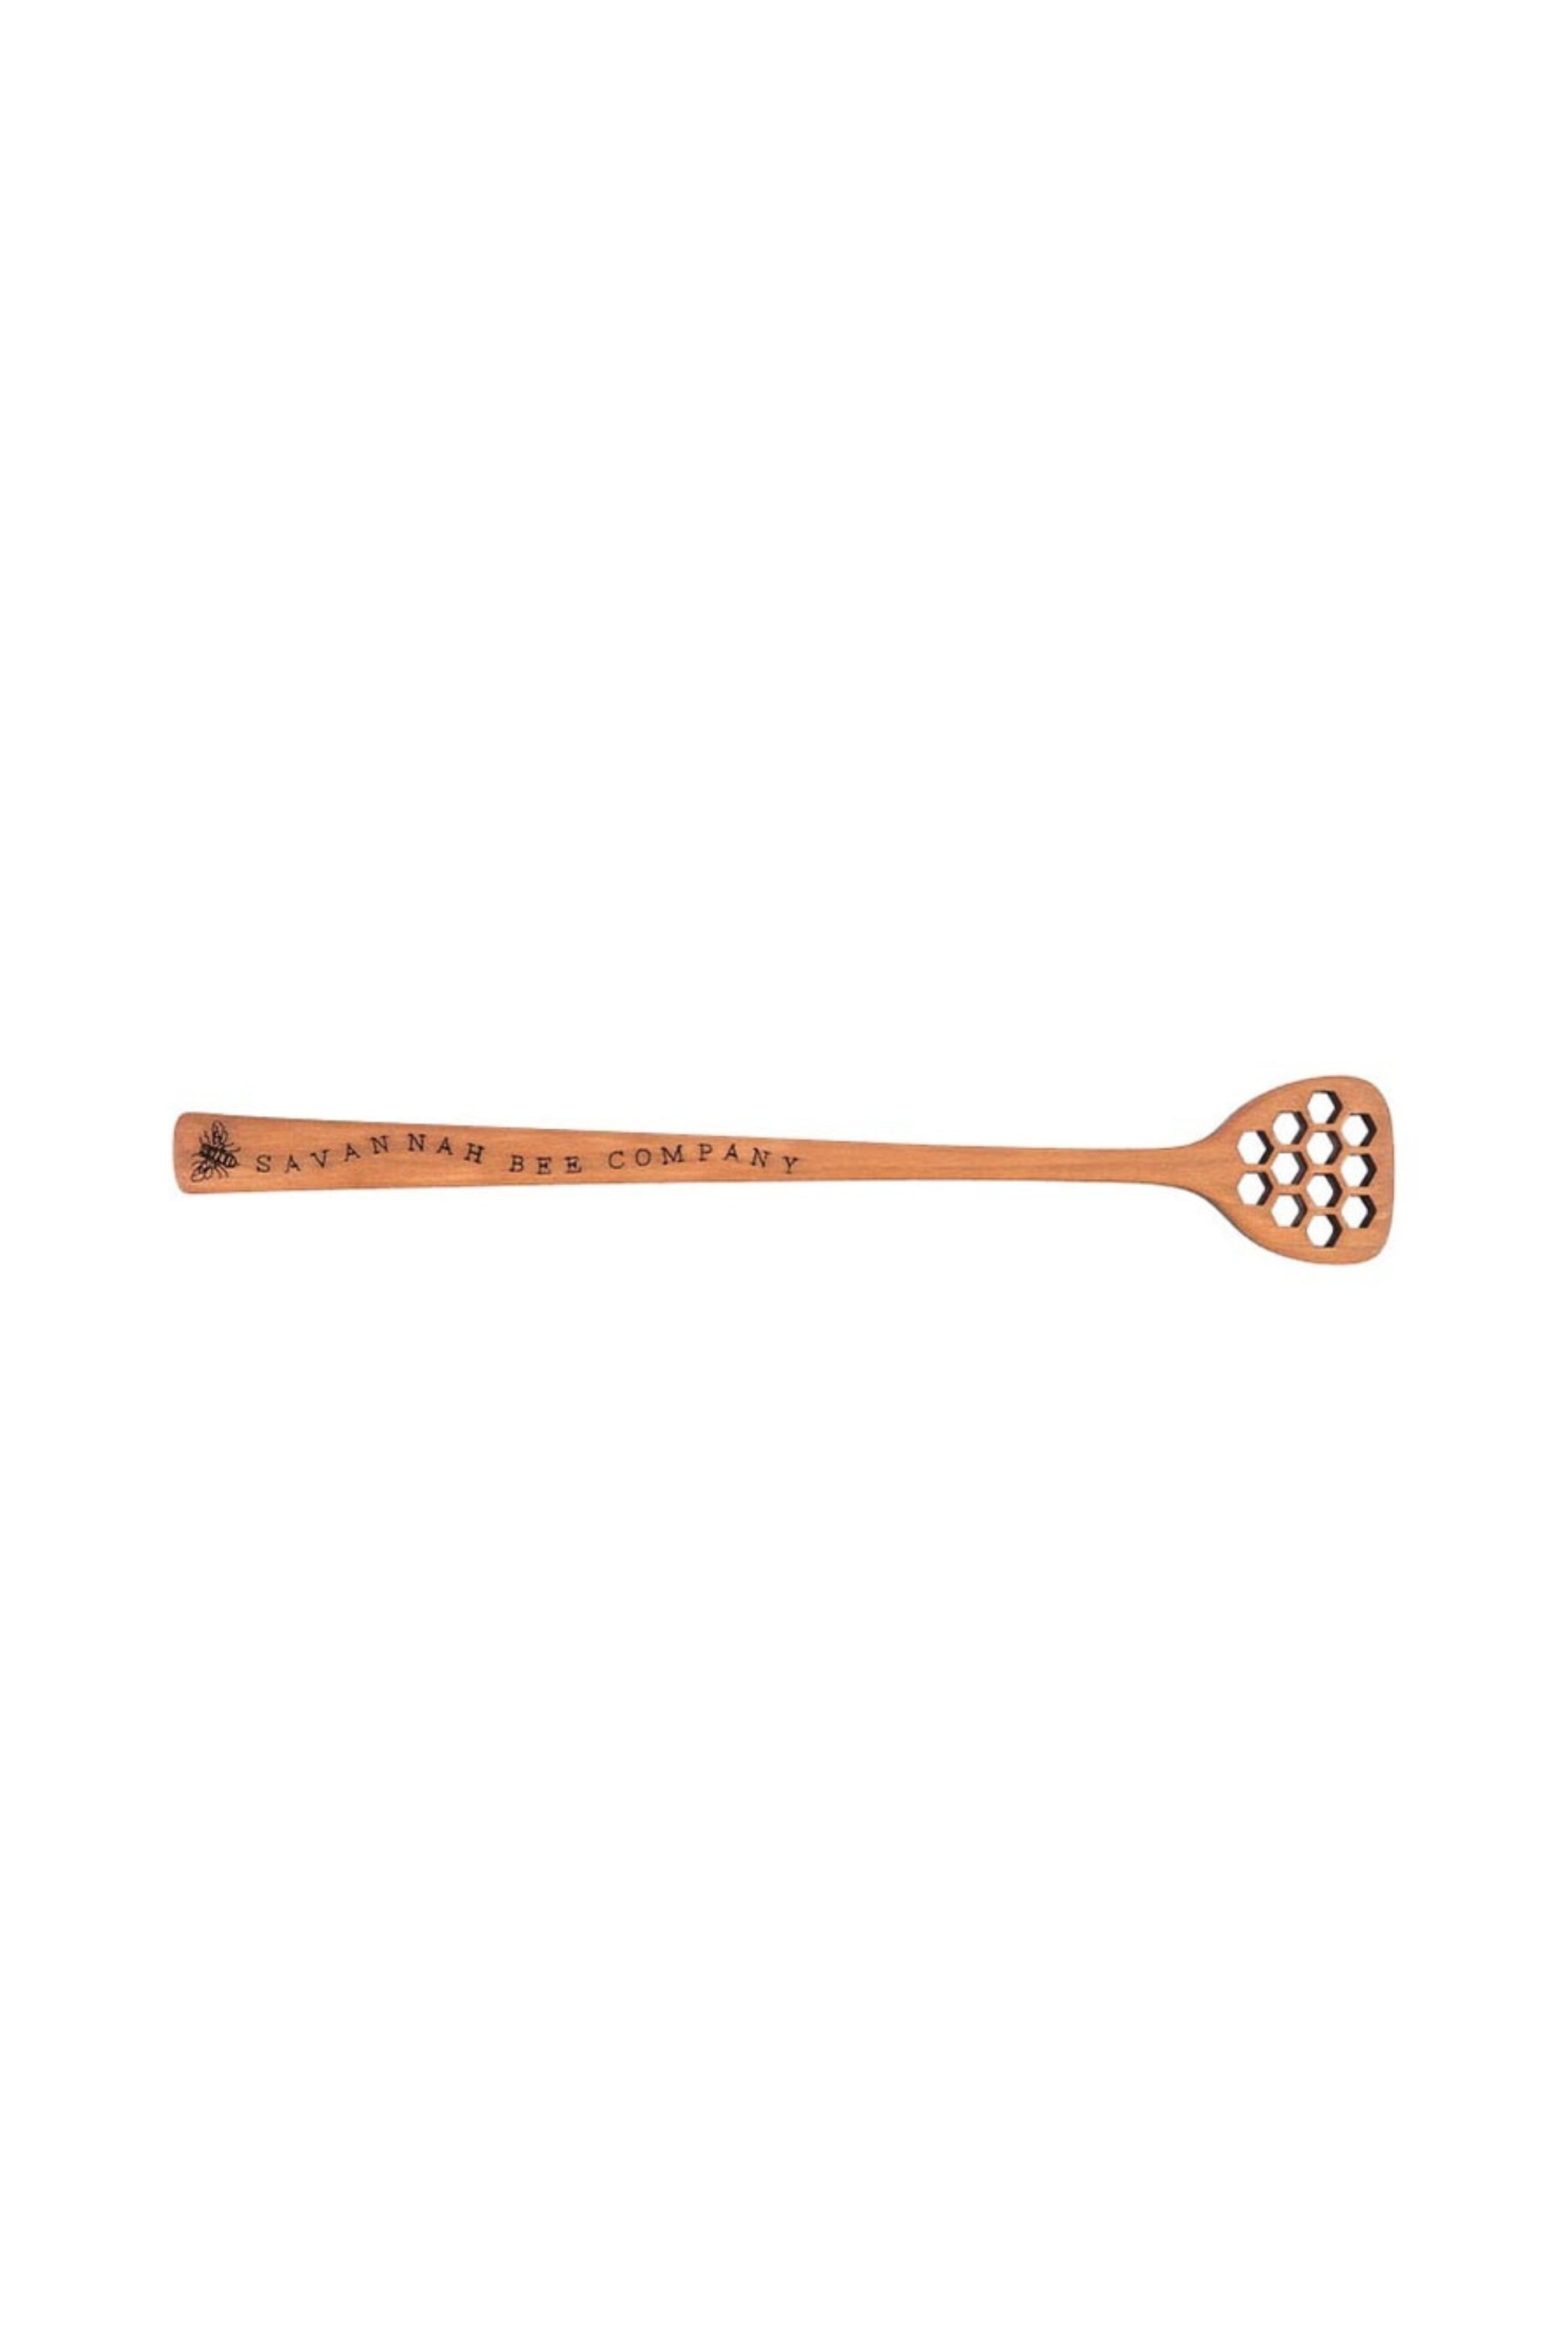 The Honey Drizzler has hexagon holes, perfect for stirring honey into your tea or coffee. 